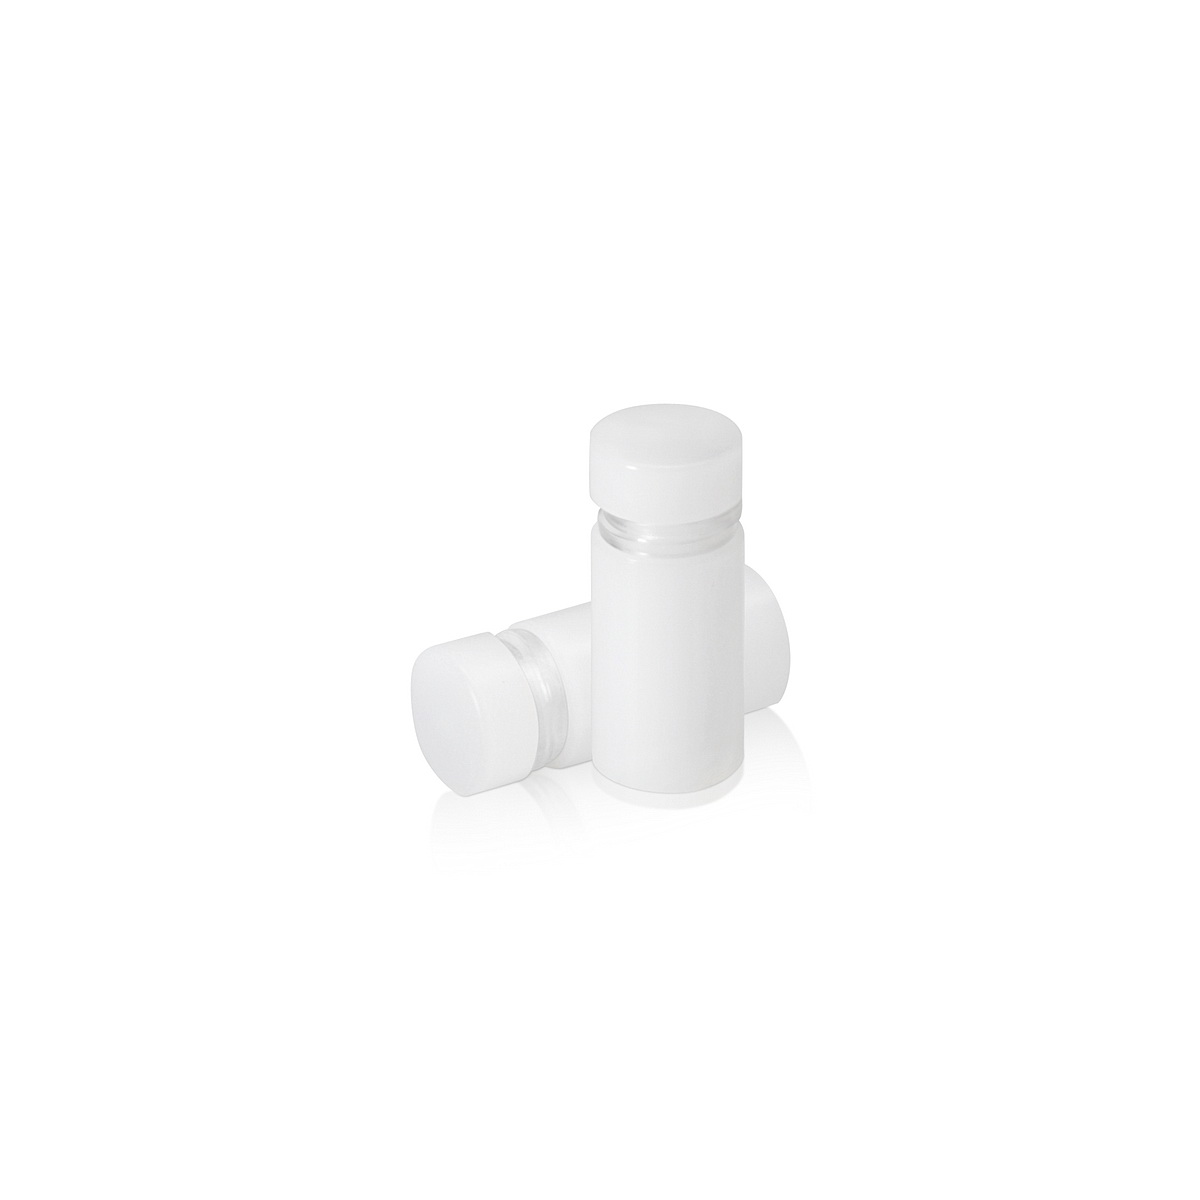 1/2'' Diameter X 1/2'' Barrel Length, White Acrylic Standoffs. Easy Fasten Standoff (For Inside Use Only) Tamper Proof [Required Material Hole Size: 3/8'']